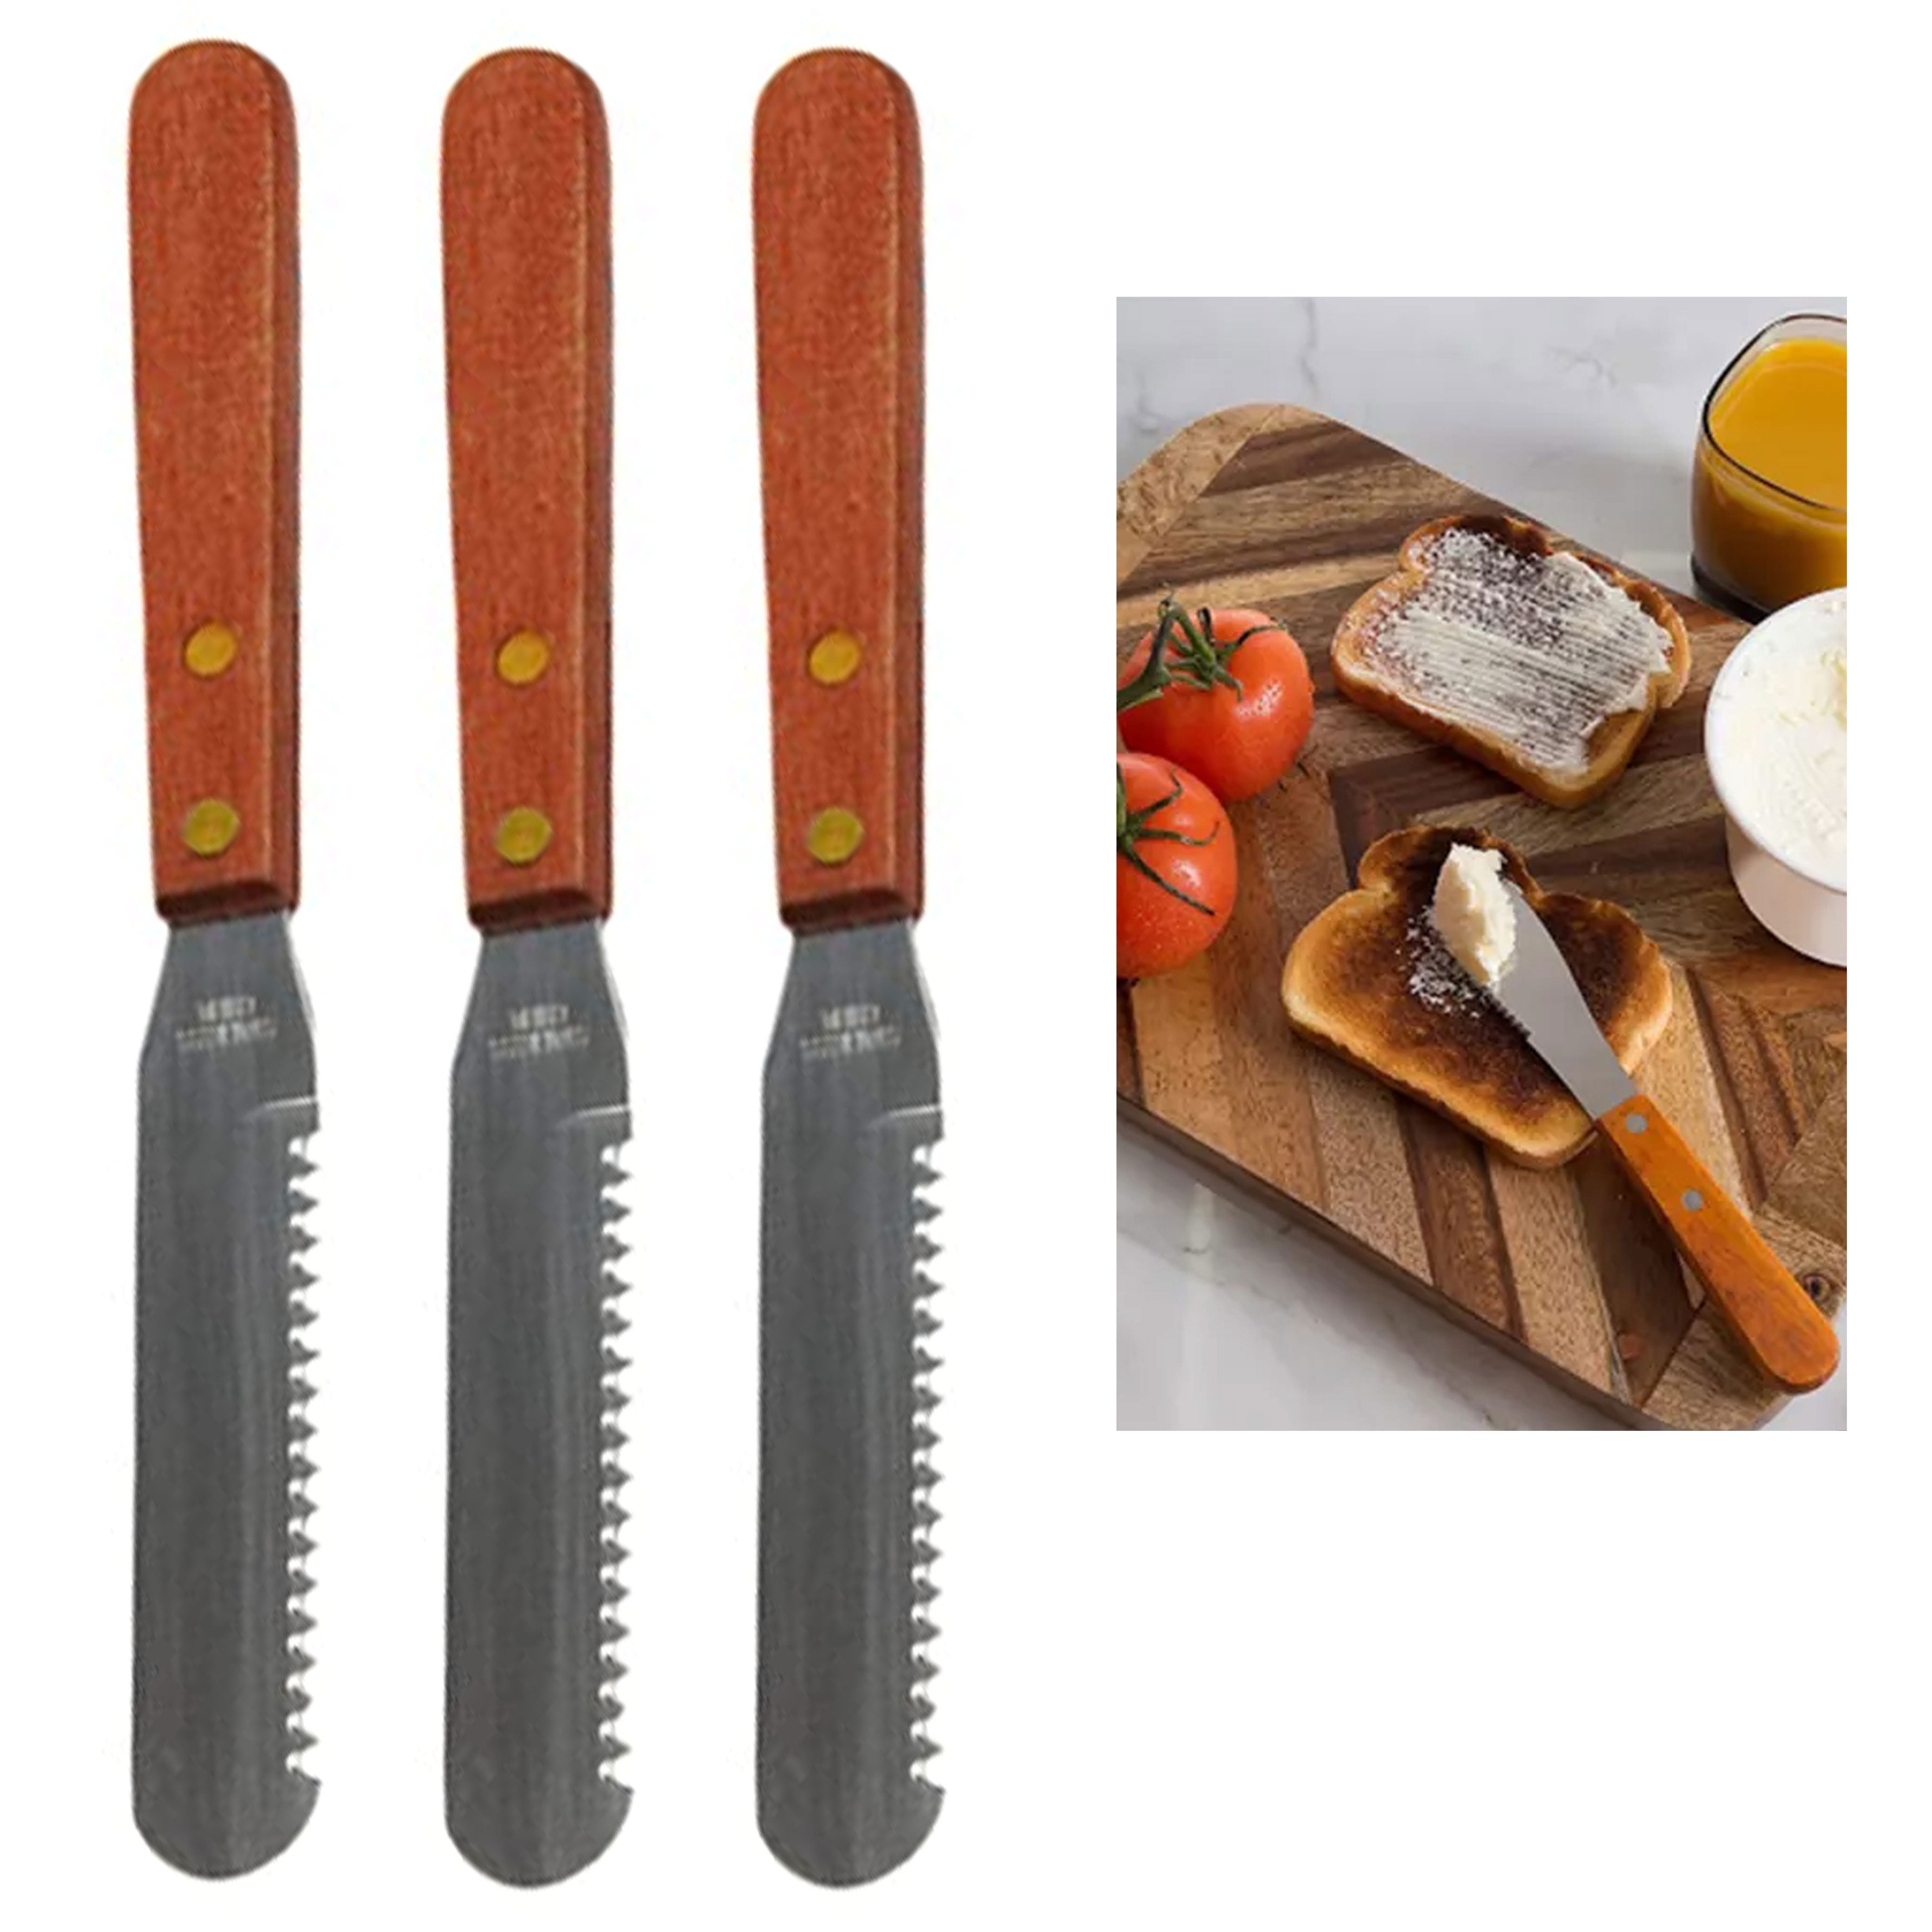 1pc Kitchen Butter Knife For Spreading Butter, Jam, And Peanut Butter On  Toasts And Sandwiches, Green/yellow